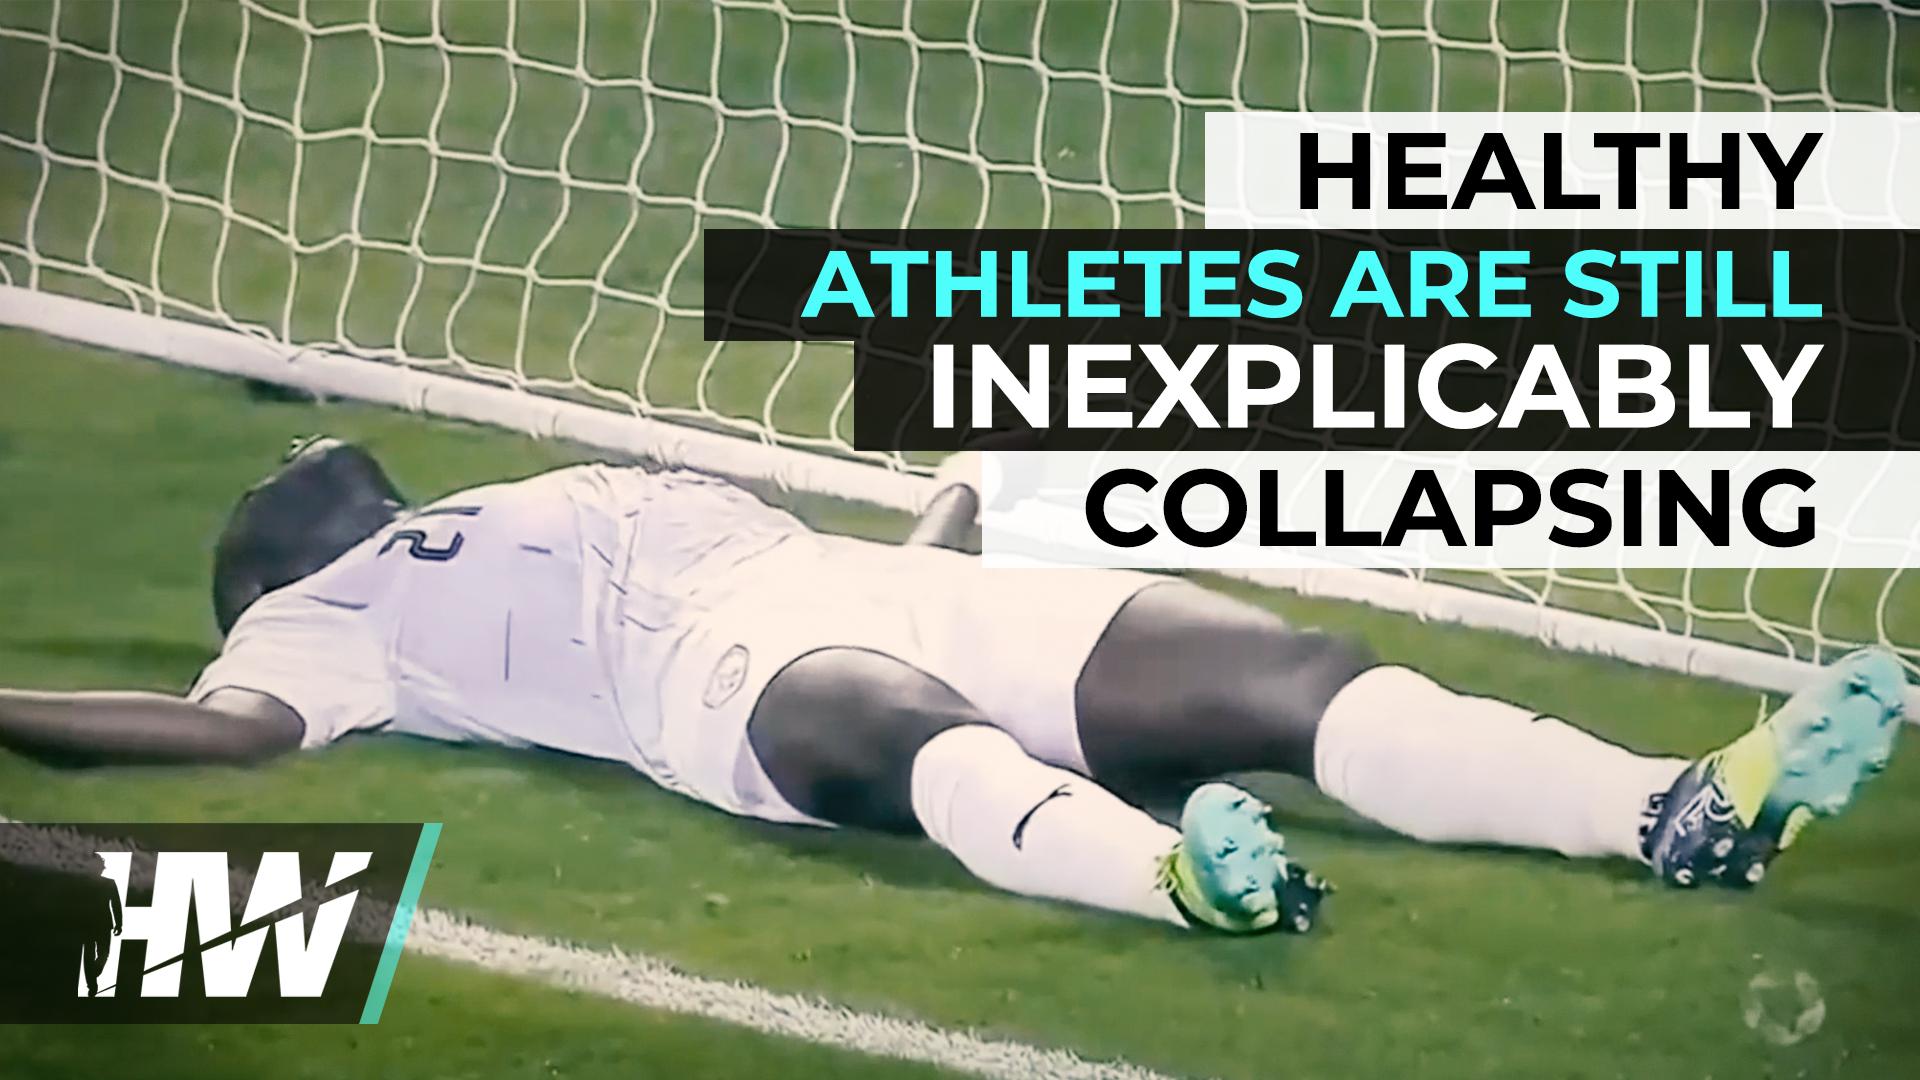 HEALTHY ATHLETES ARE STILL INEXPLICABLY COLLAPSING